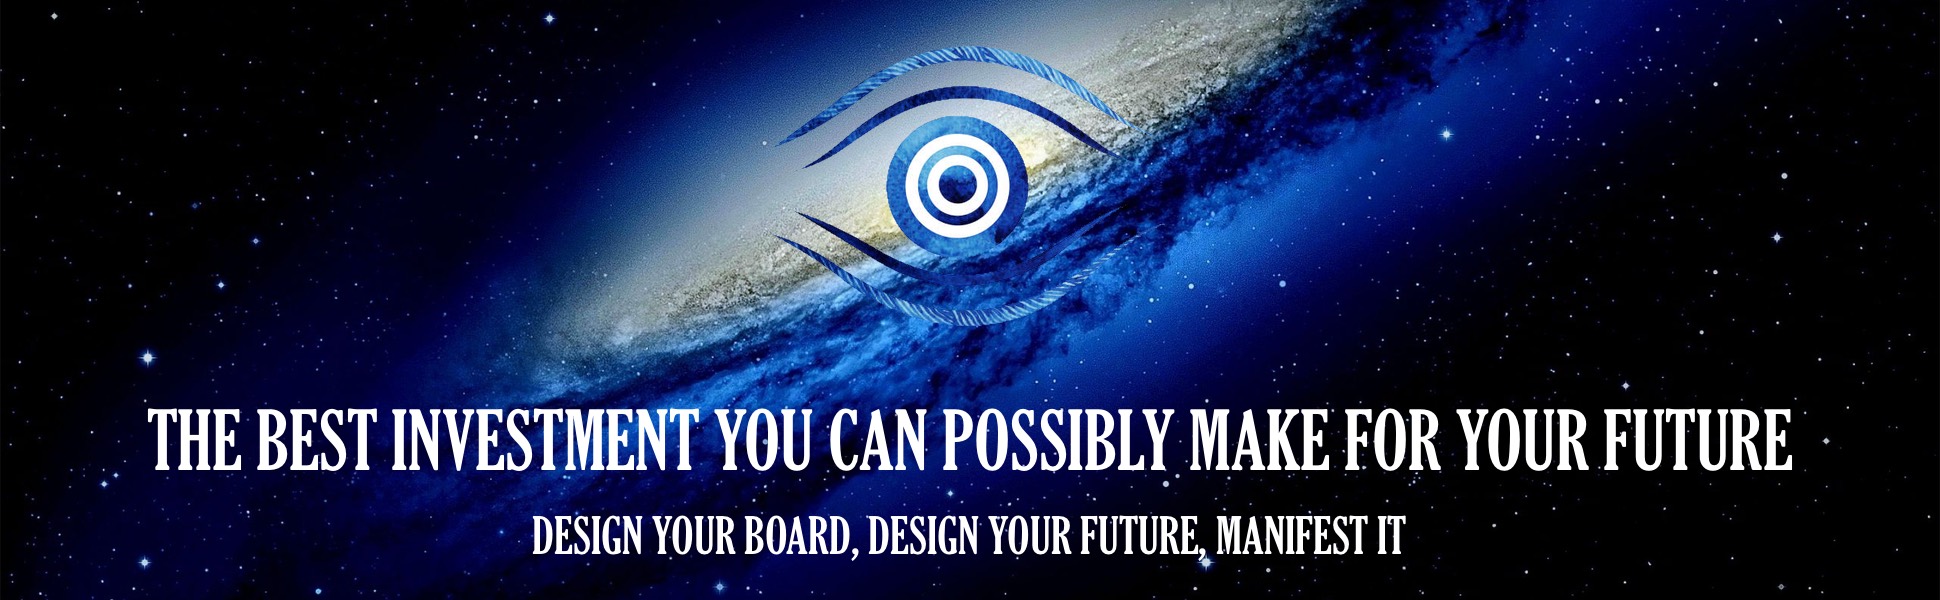 Vision Board Kit by pmxboard is the best investment you can possibly make for your future